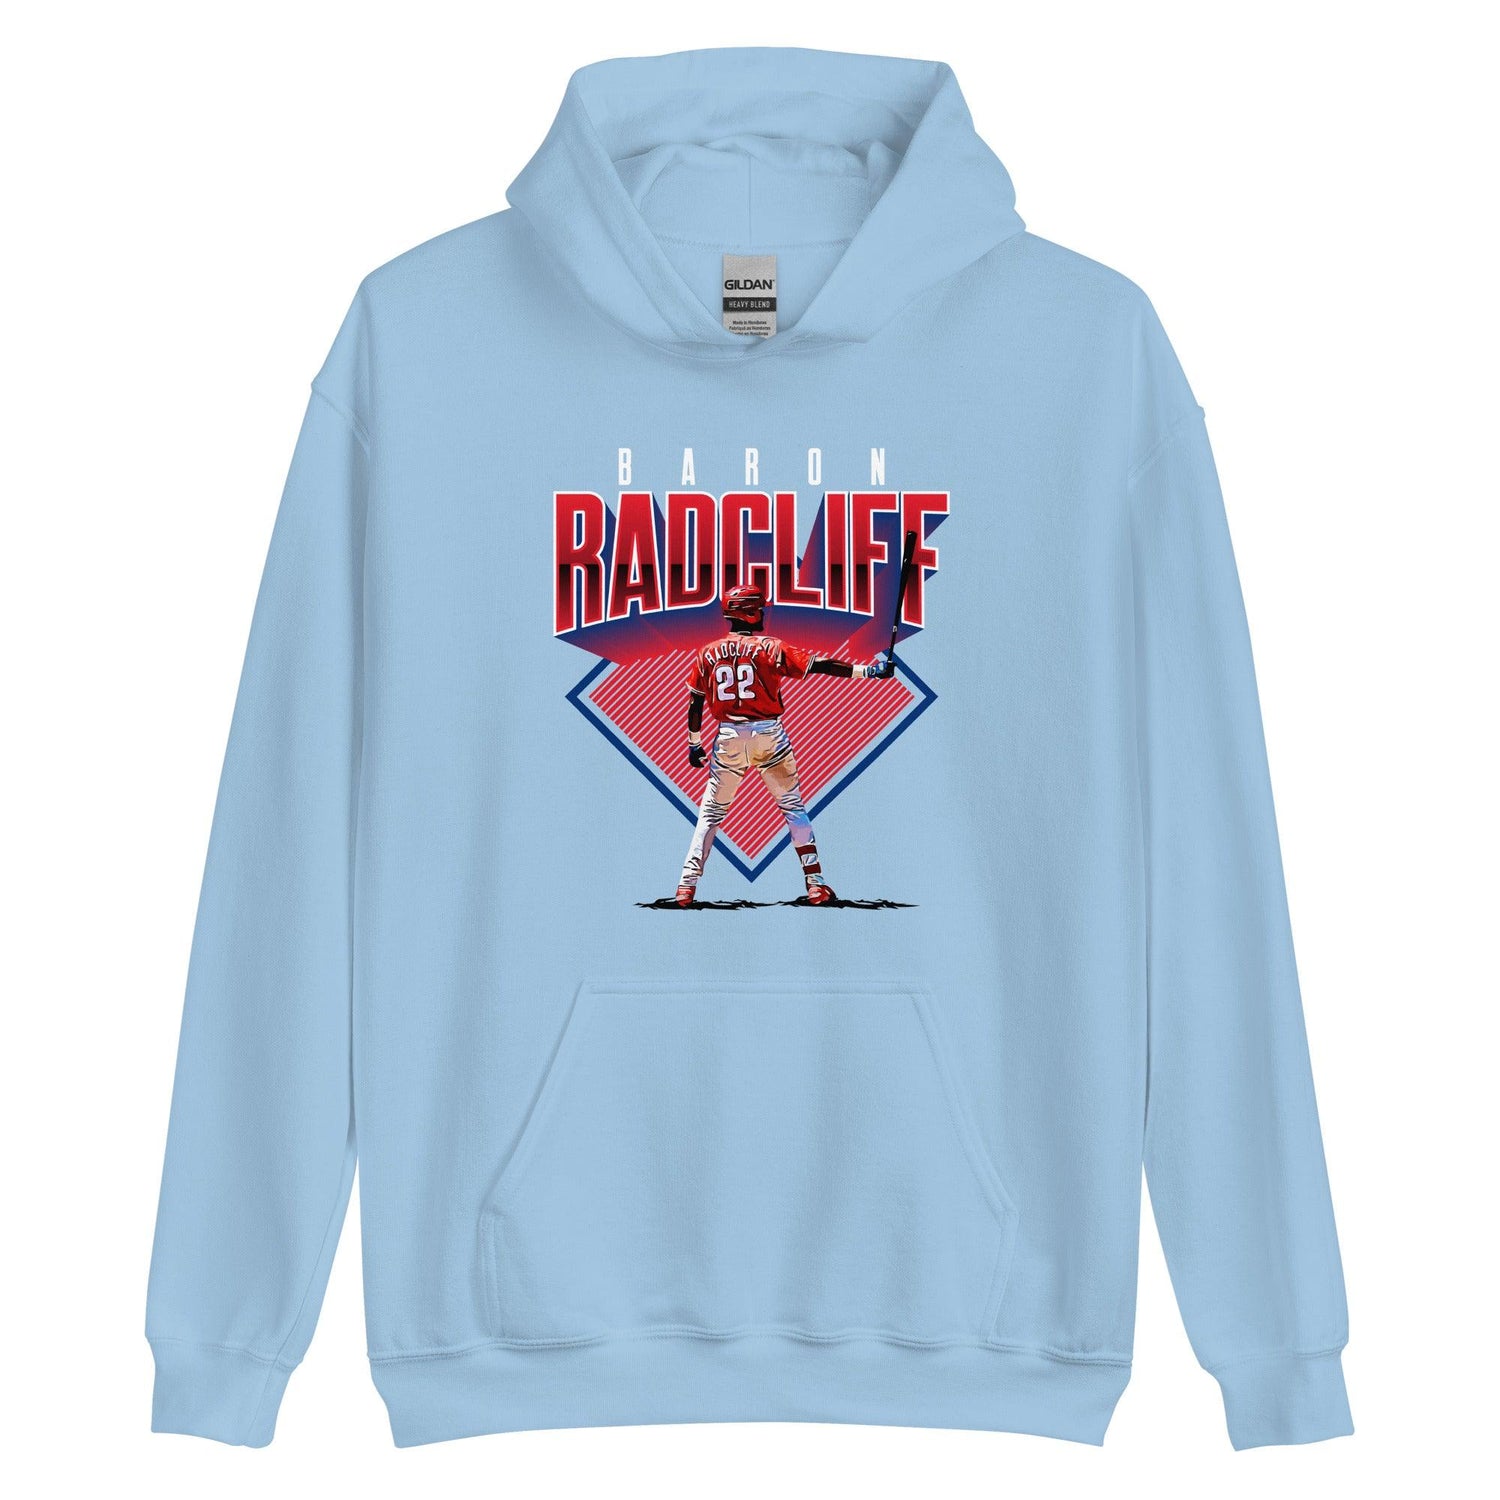 Baron Radcliff "Gameday" Hoodie - Fan Arch